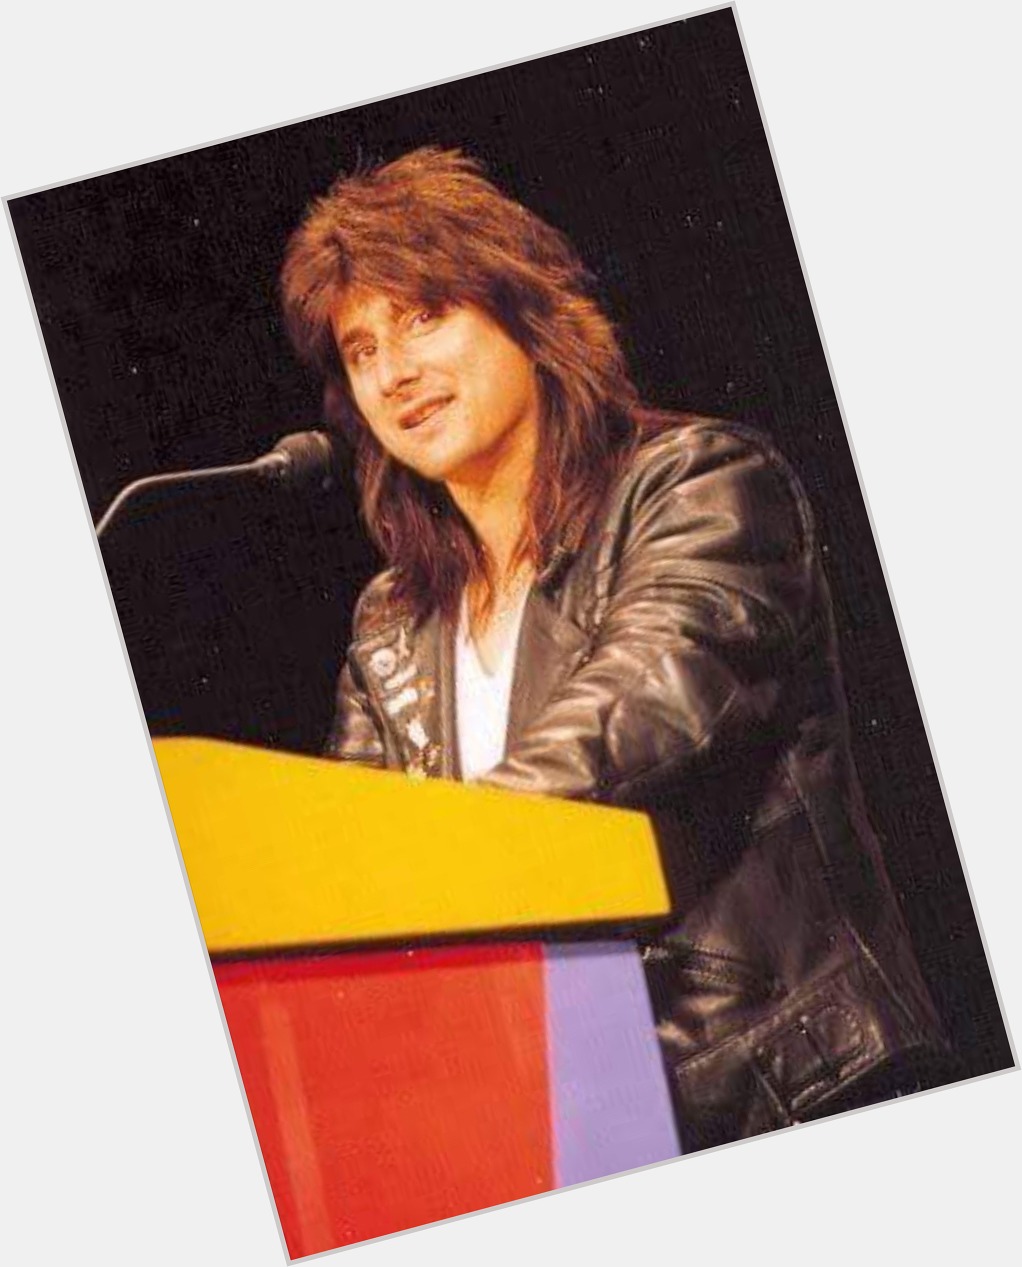 Happy birthday to the one and only steve perry   